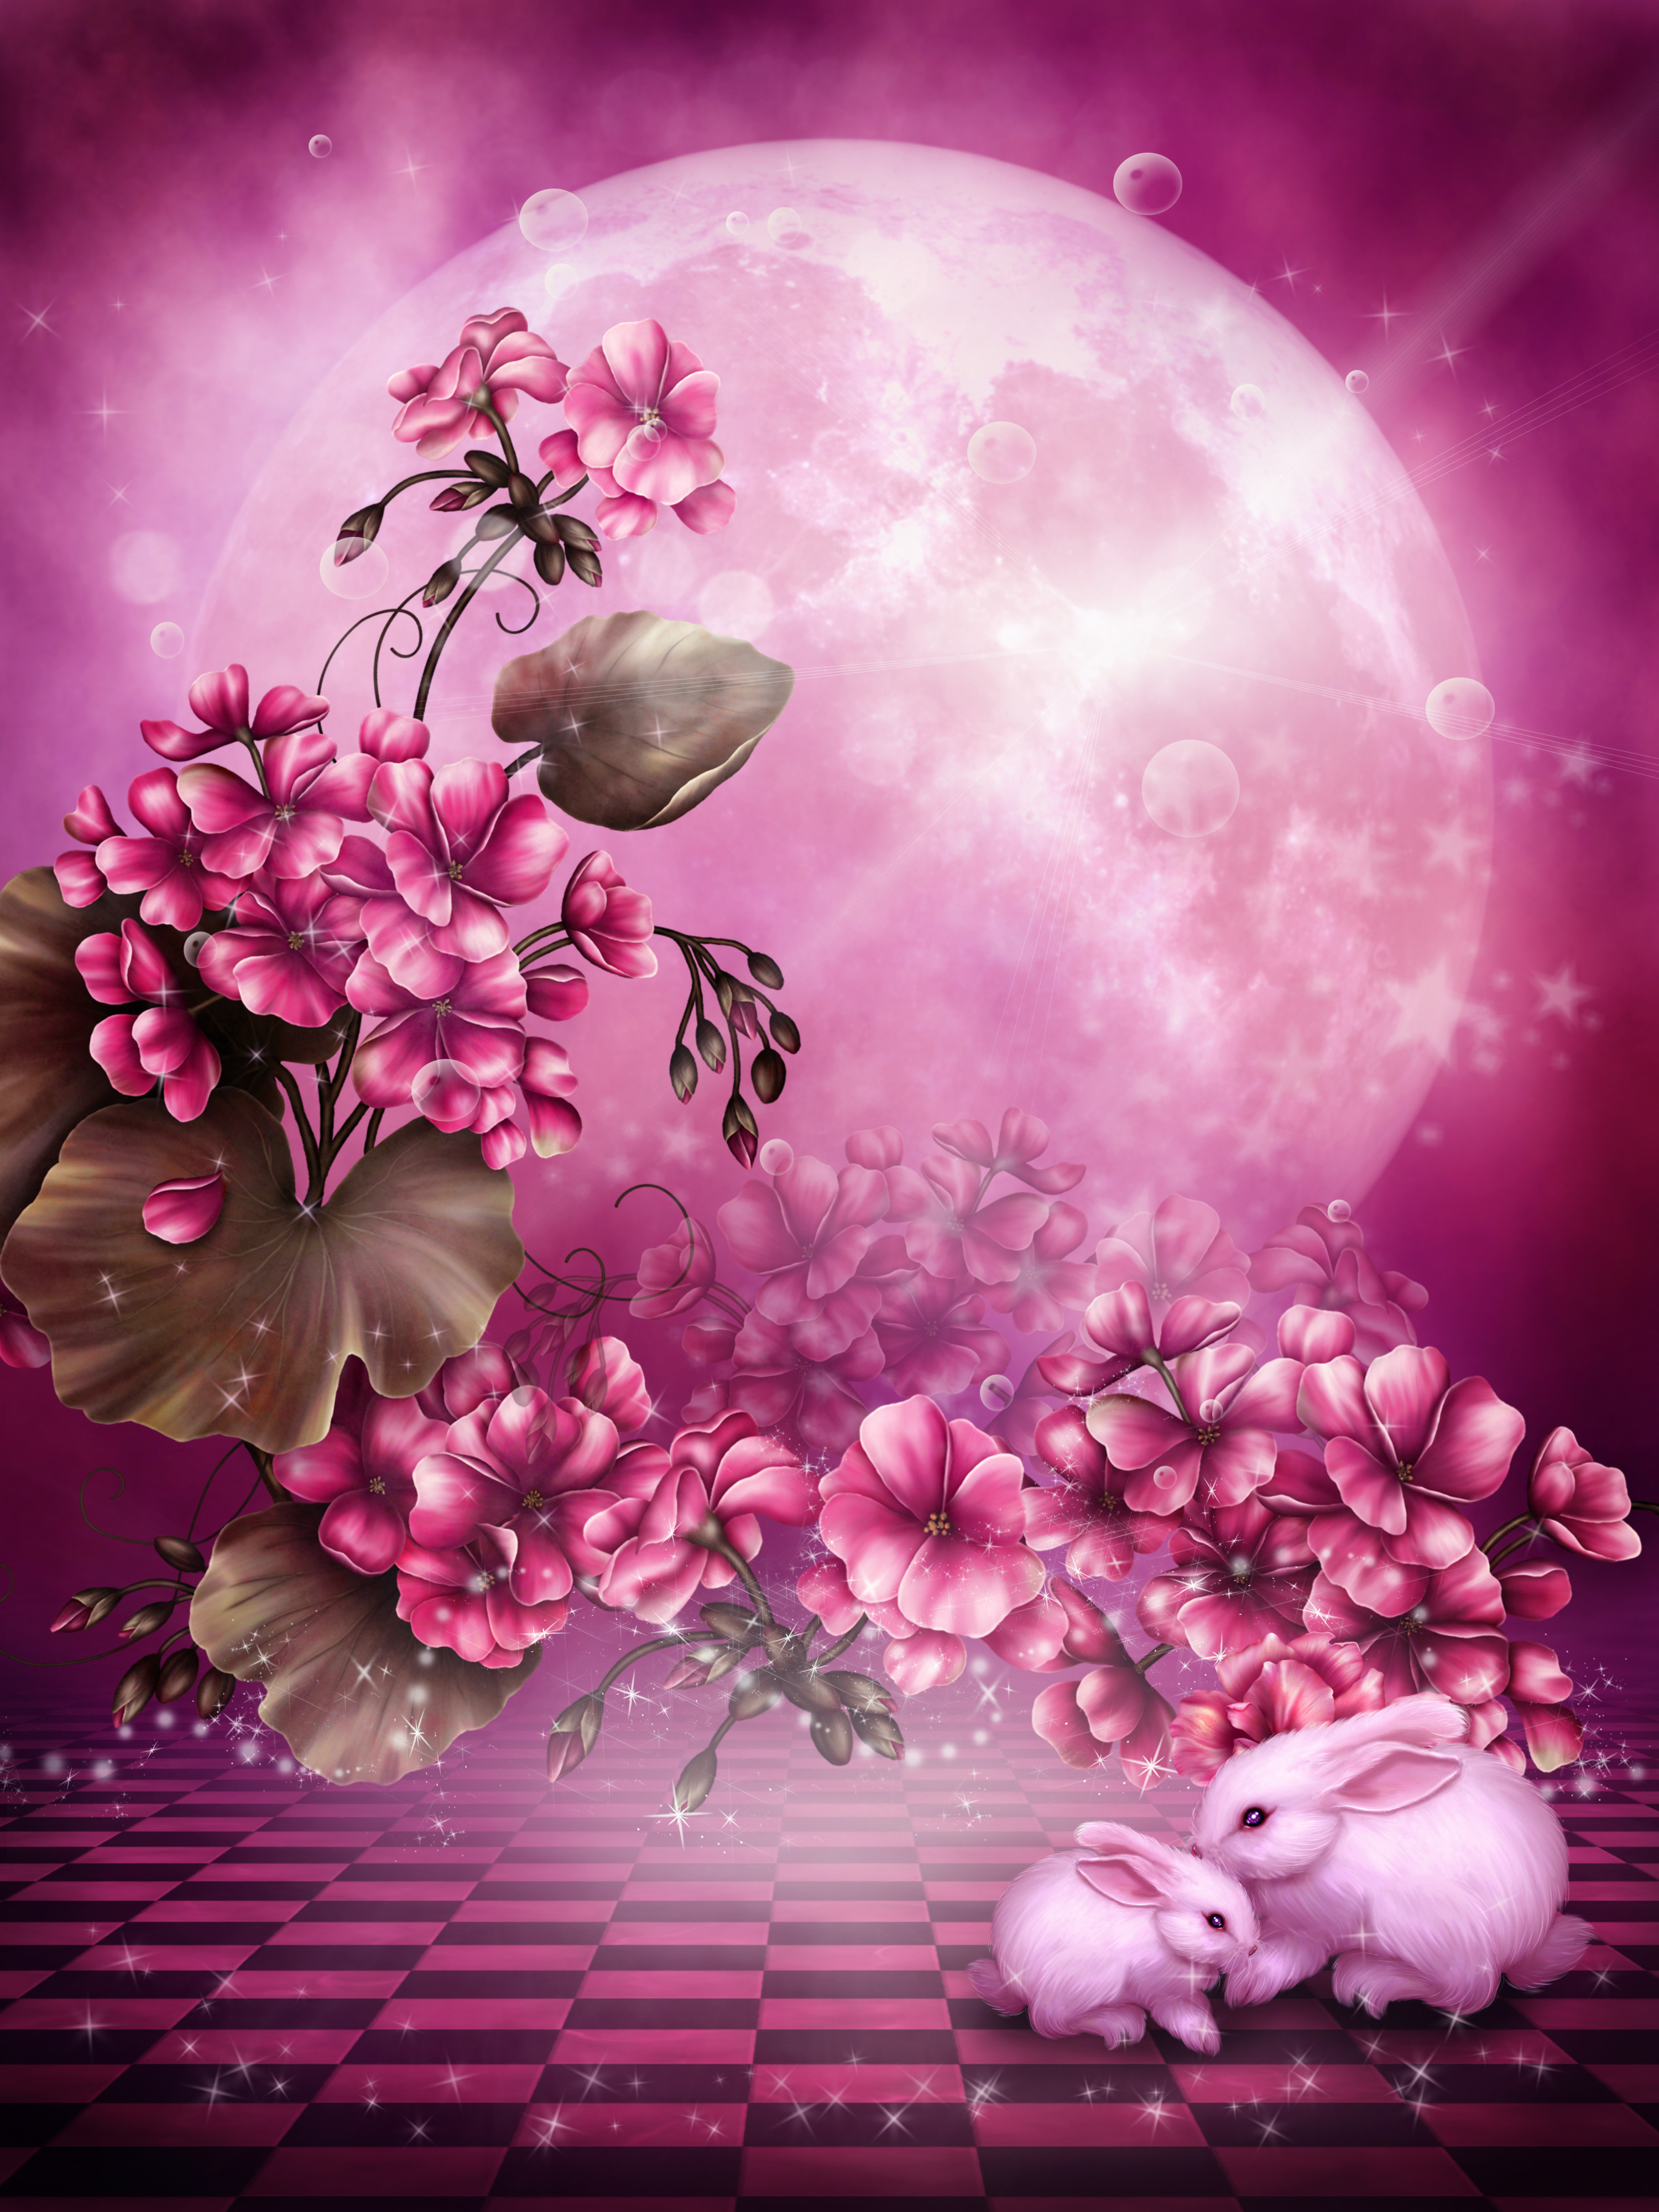 pictures, flowers, plants, rabbits, red Aesthetic wallpaper